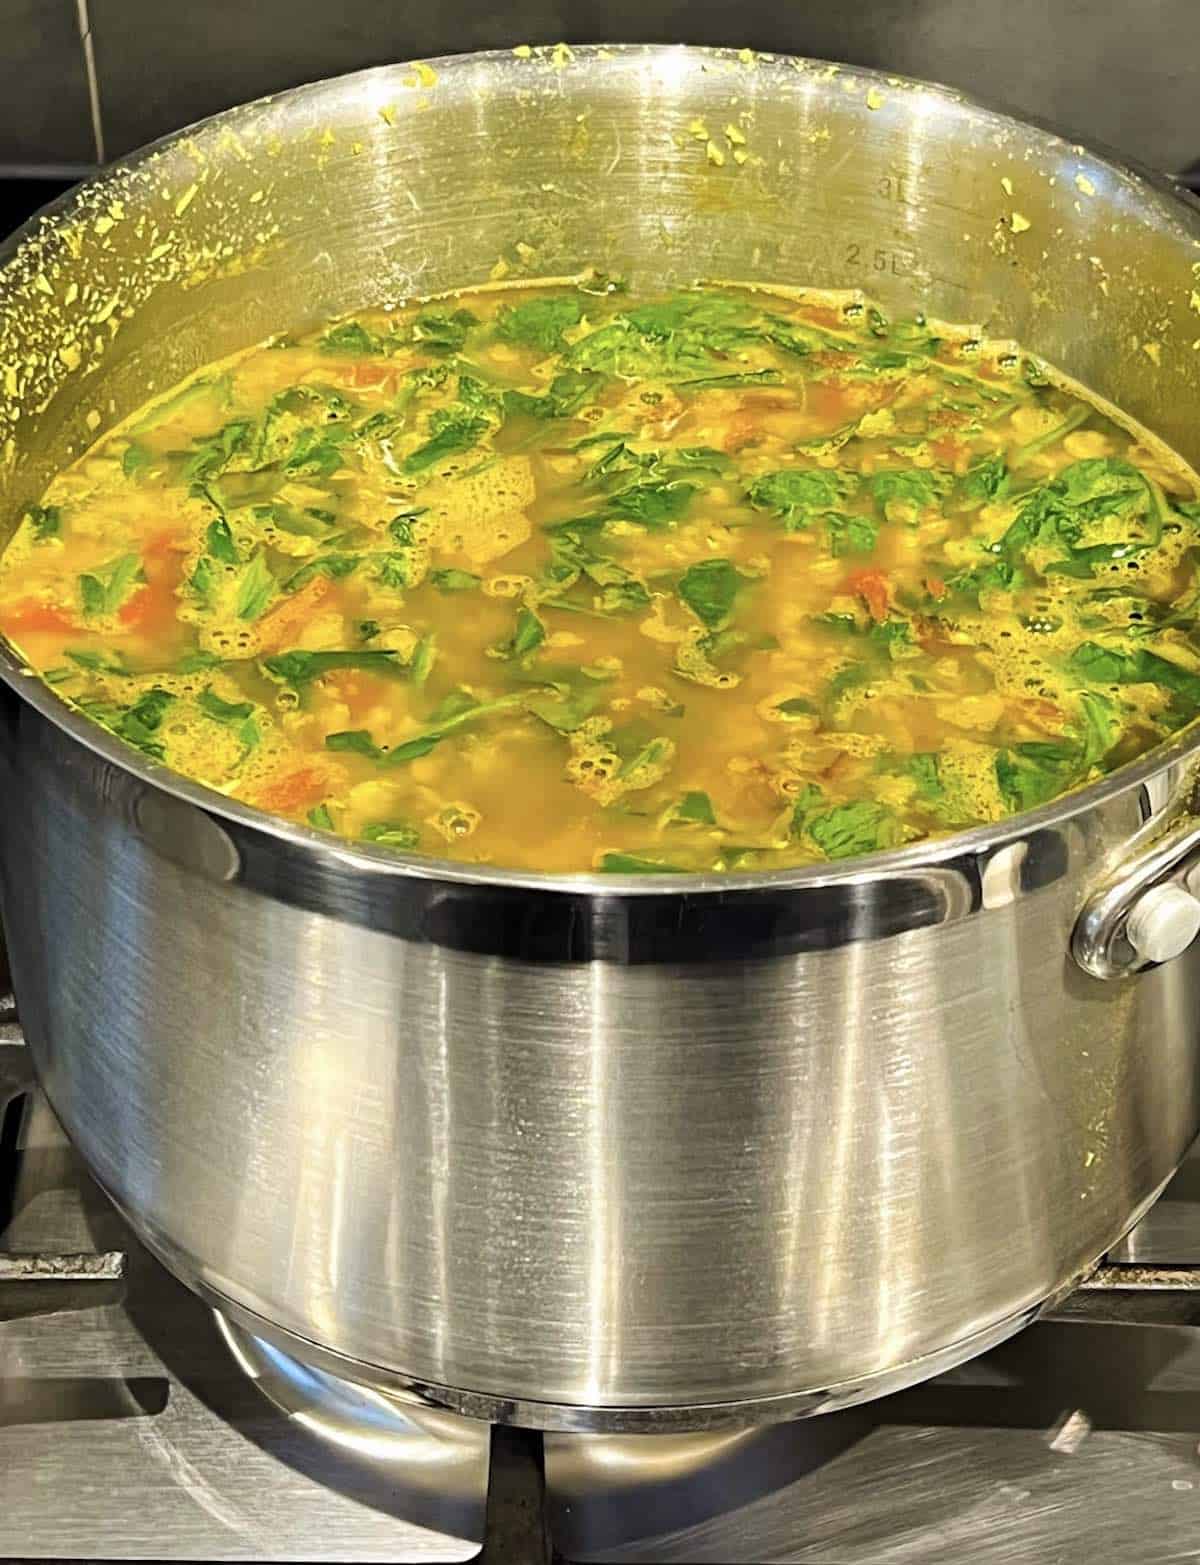 spinach in the dal